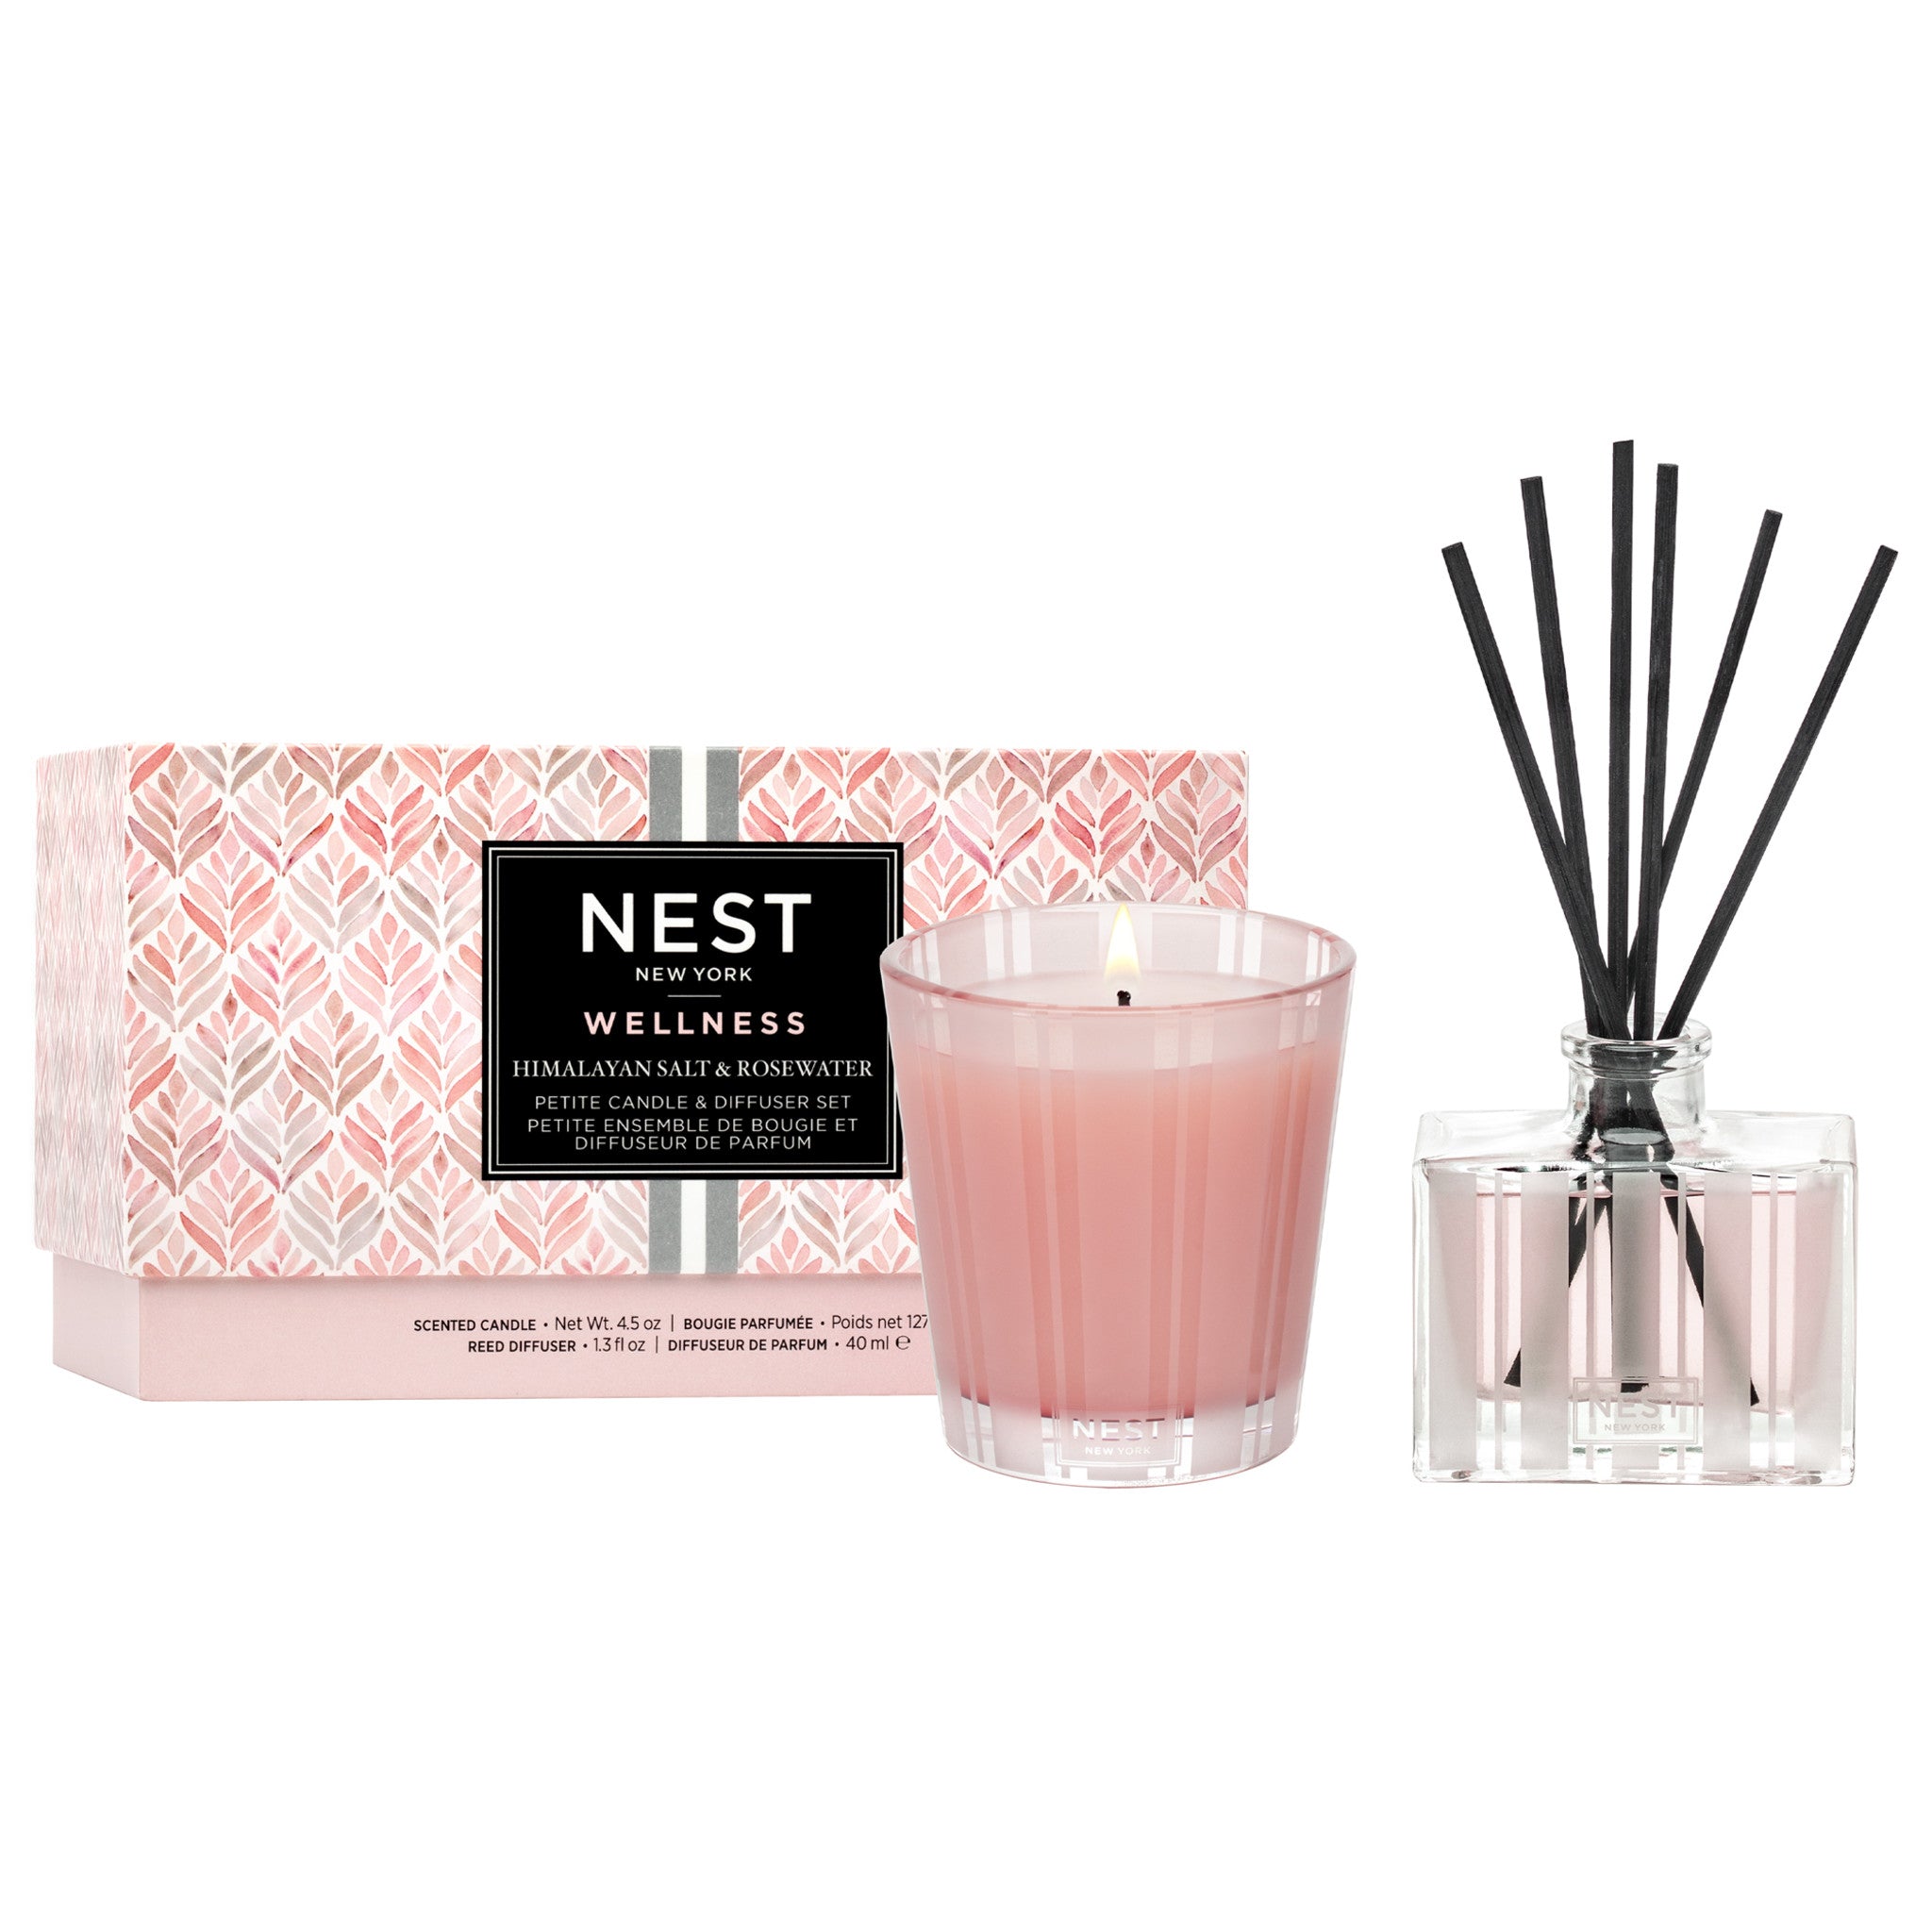 Nest Himalayan Salt and Rosewater Petite Candle and Petite Reed Diffuser Set (Limited Edition)  main image.